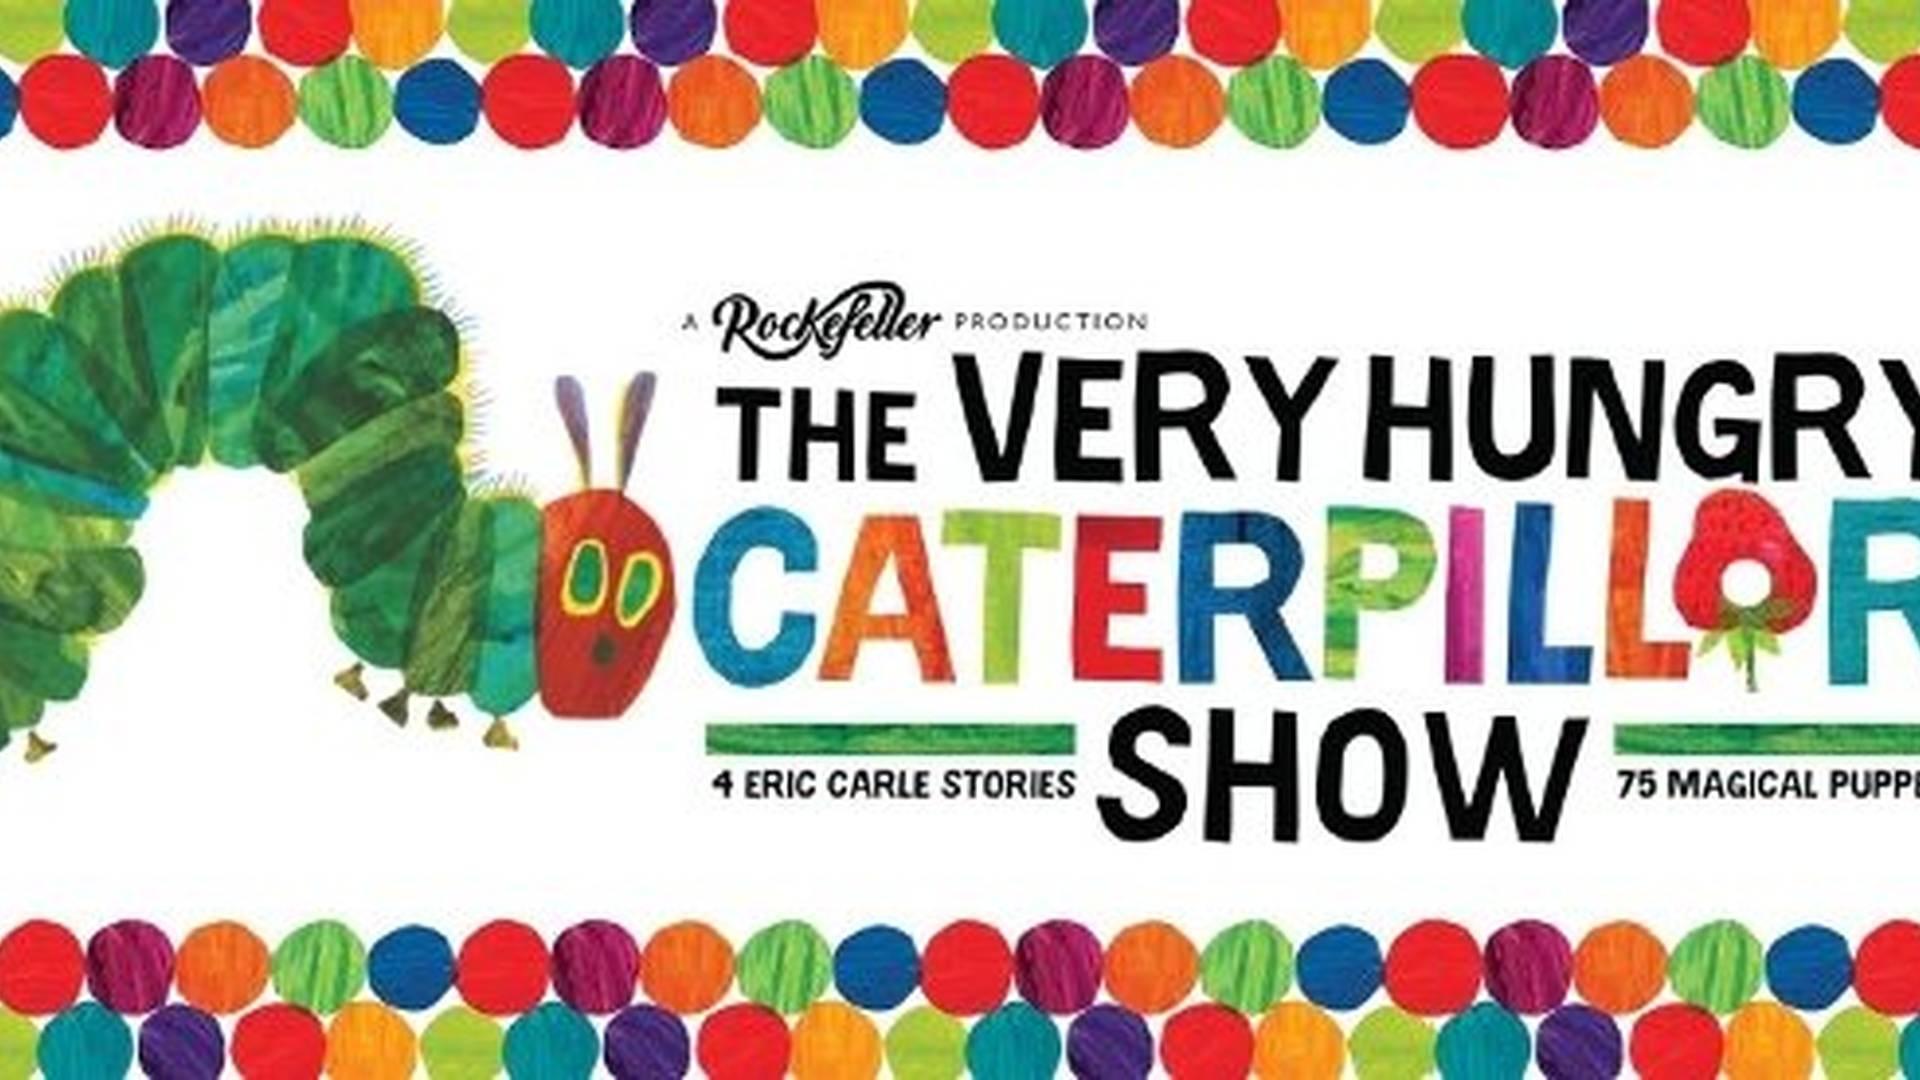 The Very Hungry Caterpillar Show photo